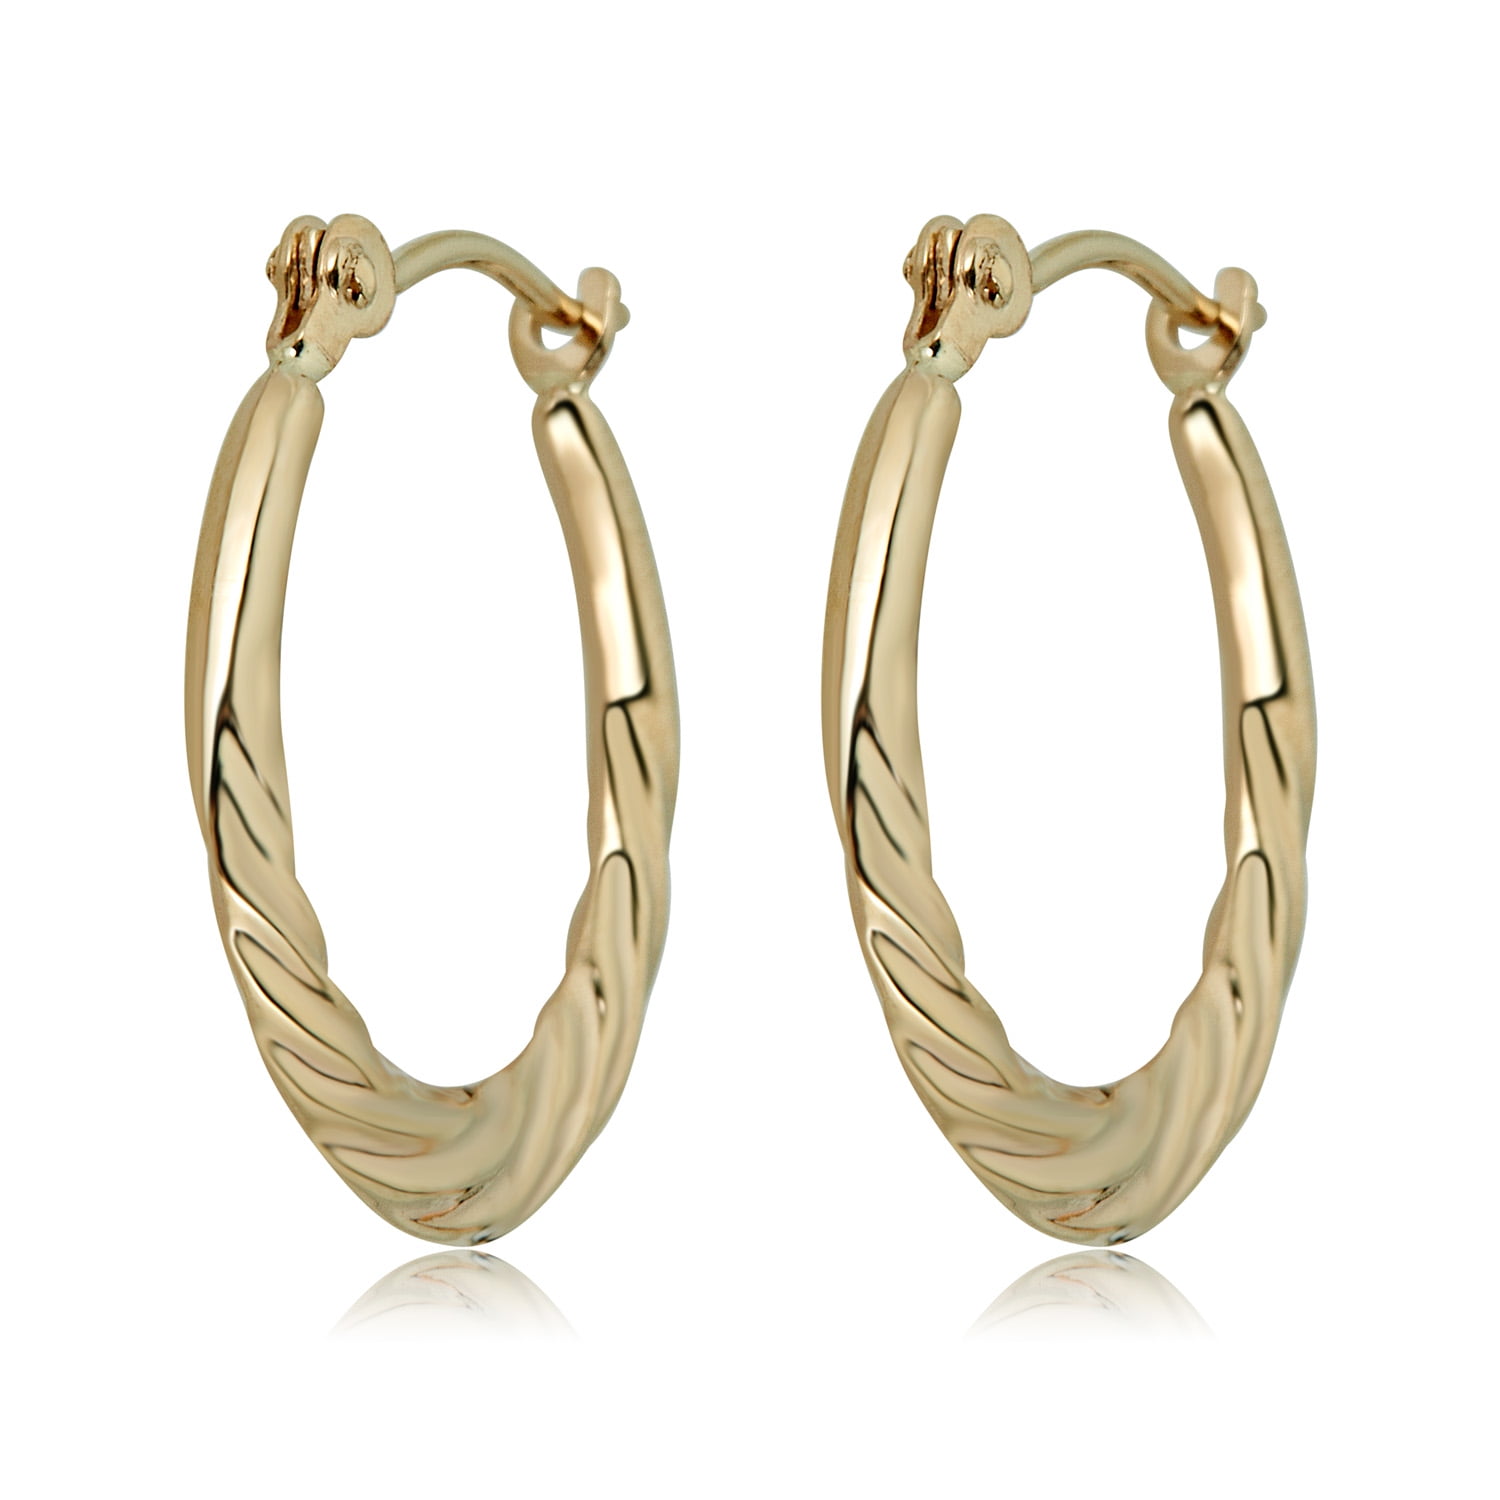 14K Yellow and White 2 Two Tone Gold 1.5mm Thickness Twisted Hoop Earrings 